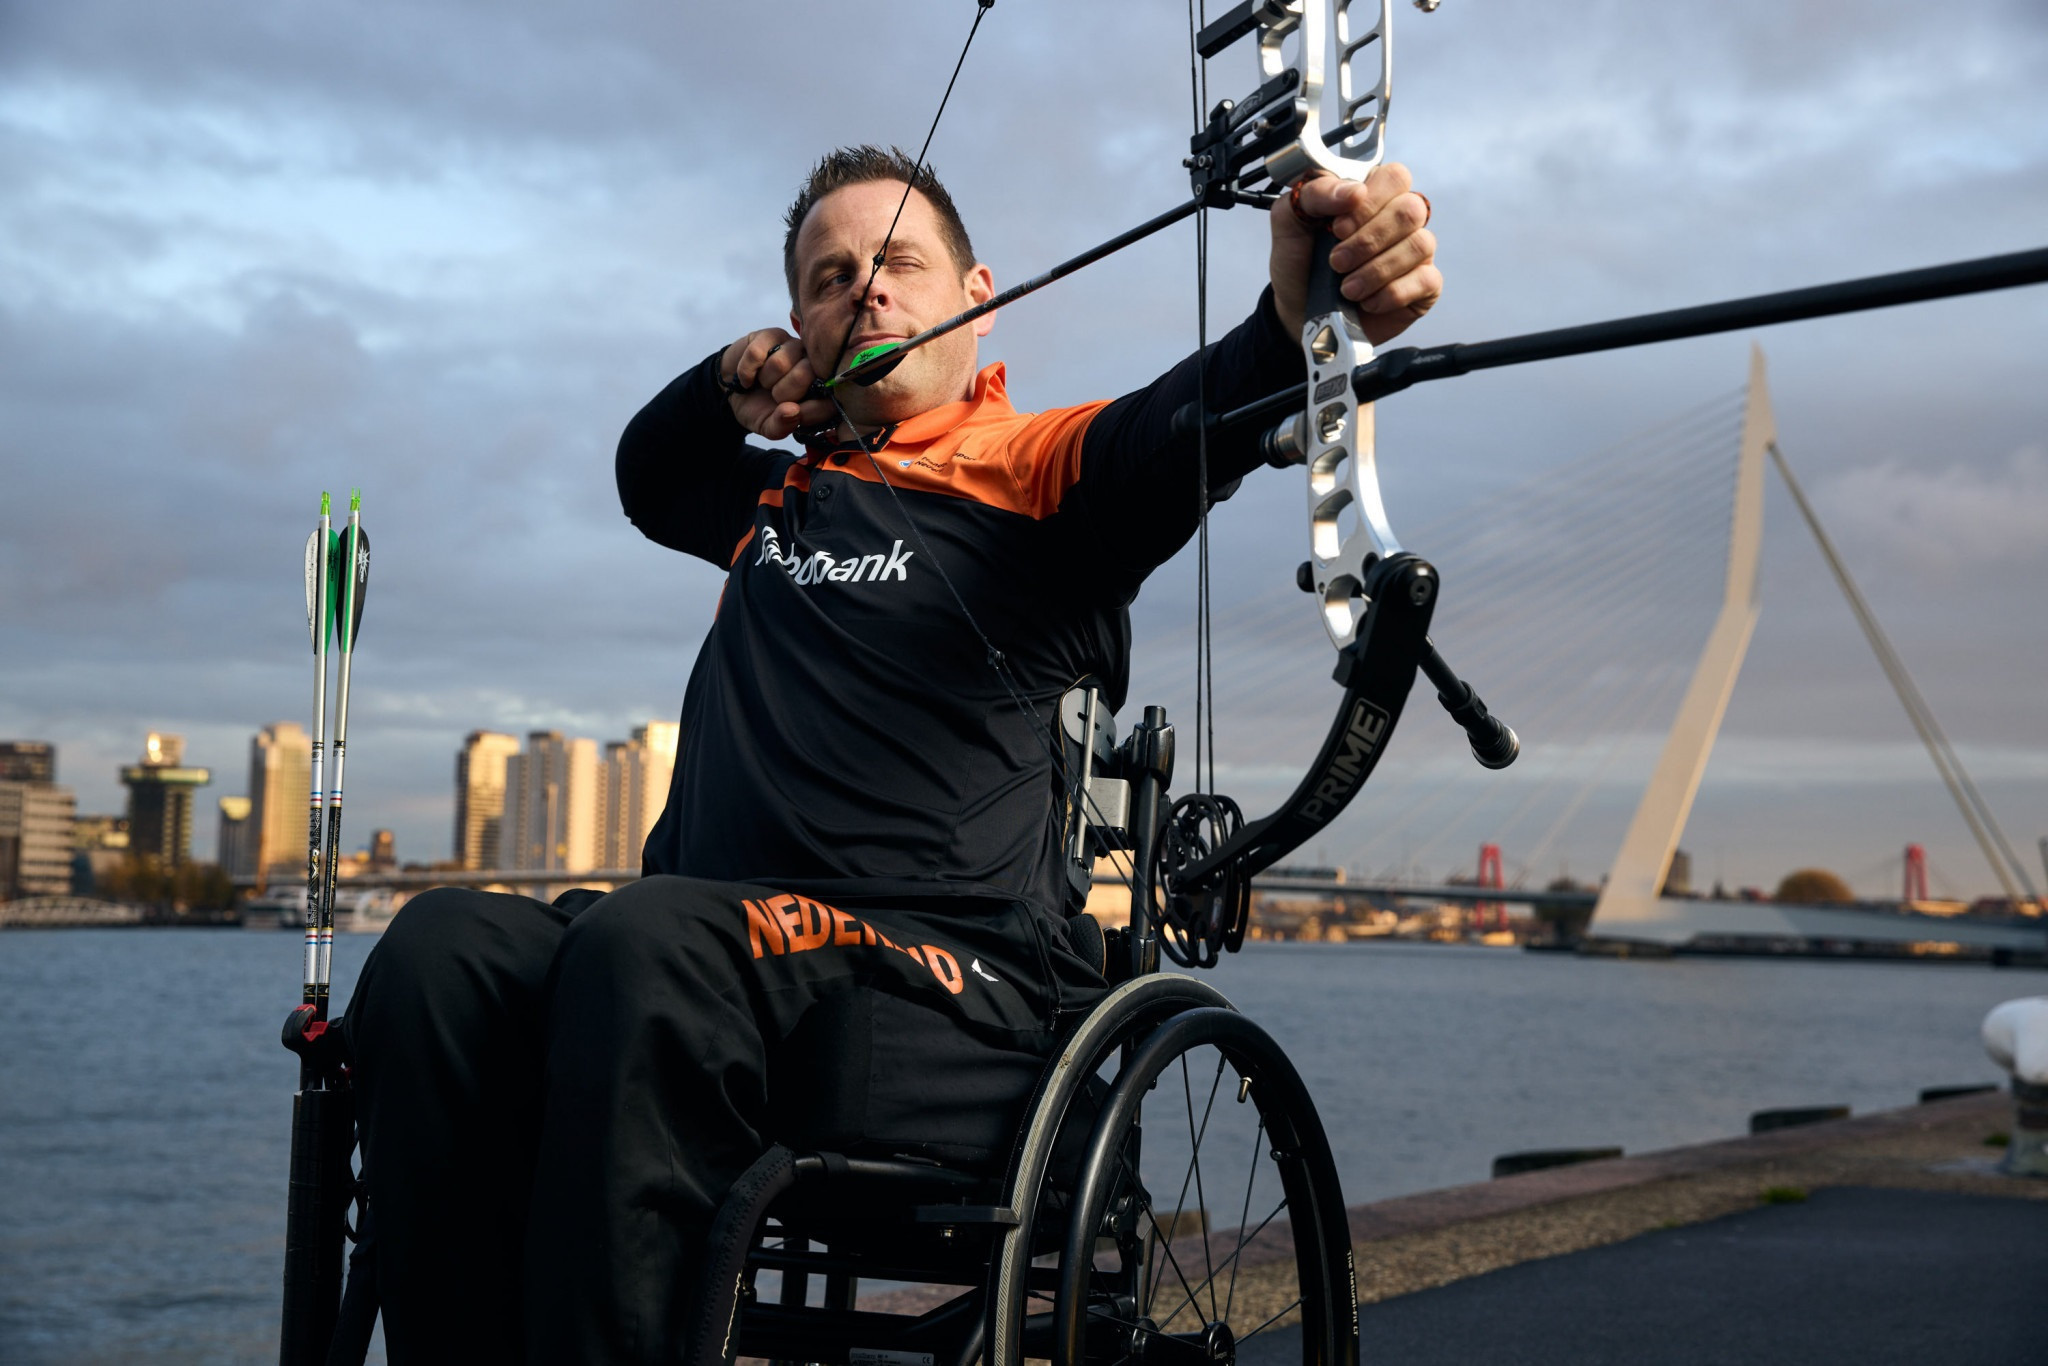 Para archery is among the sports that is set to form part of the European Para Championships ©European Para Championships